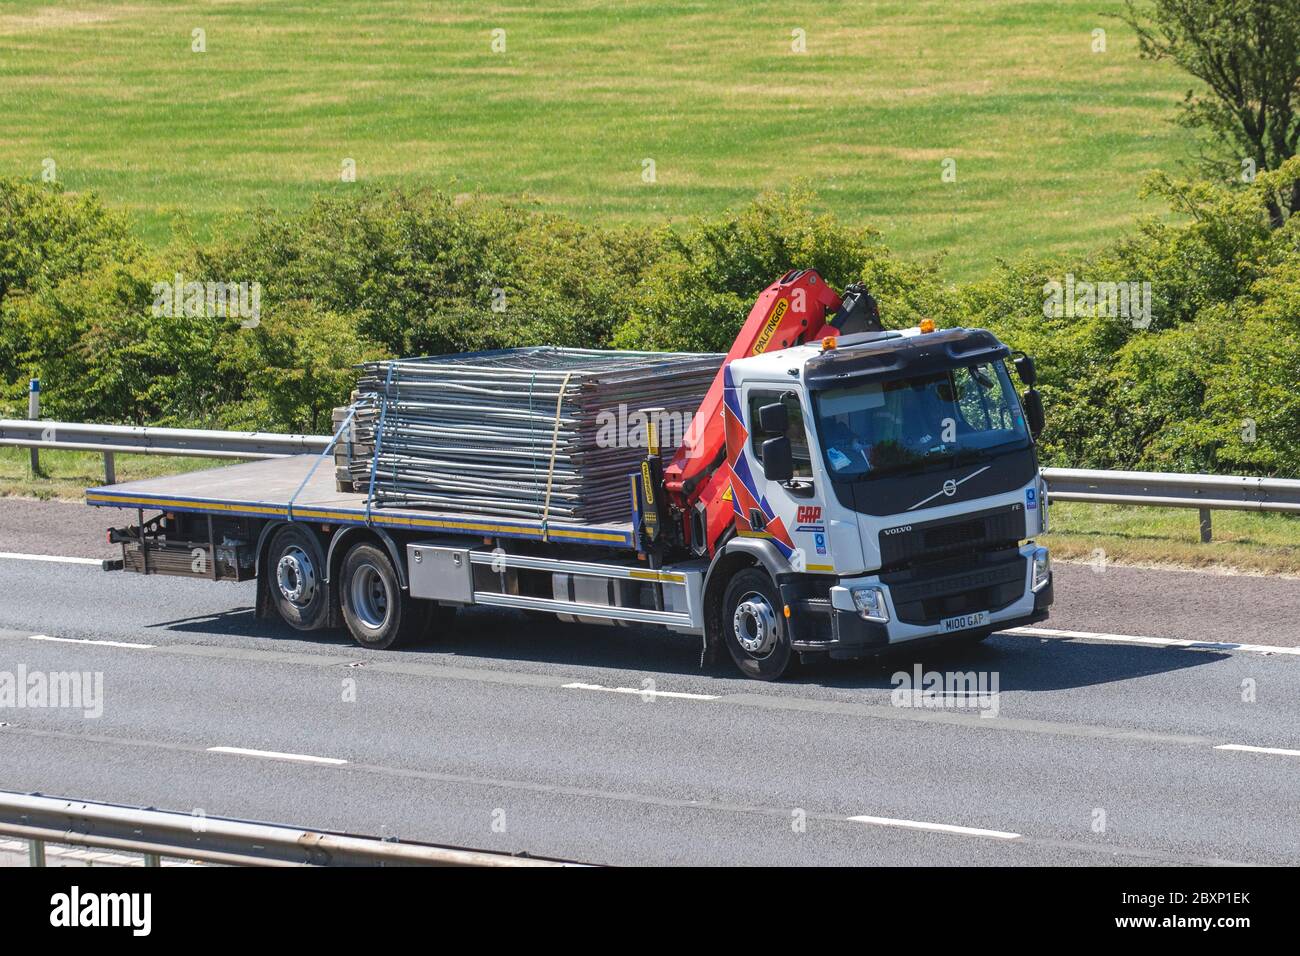 Gap Group Ltd; Haulage delivery trucks, lorry, transportation, truck, cargo carrier, private number plate, personalised, cherished, dateless registrations, DVLA registration marks, Volvo FEvehicle, European commercial transport industry HGV, M61 at Manchester, UK Stock Photo